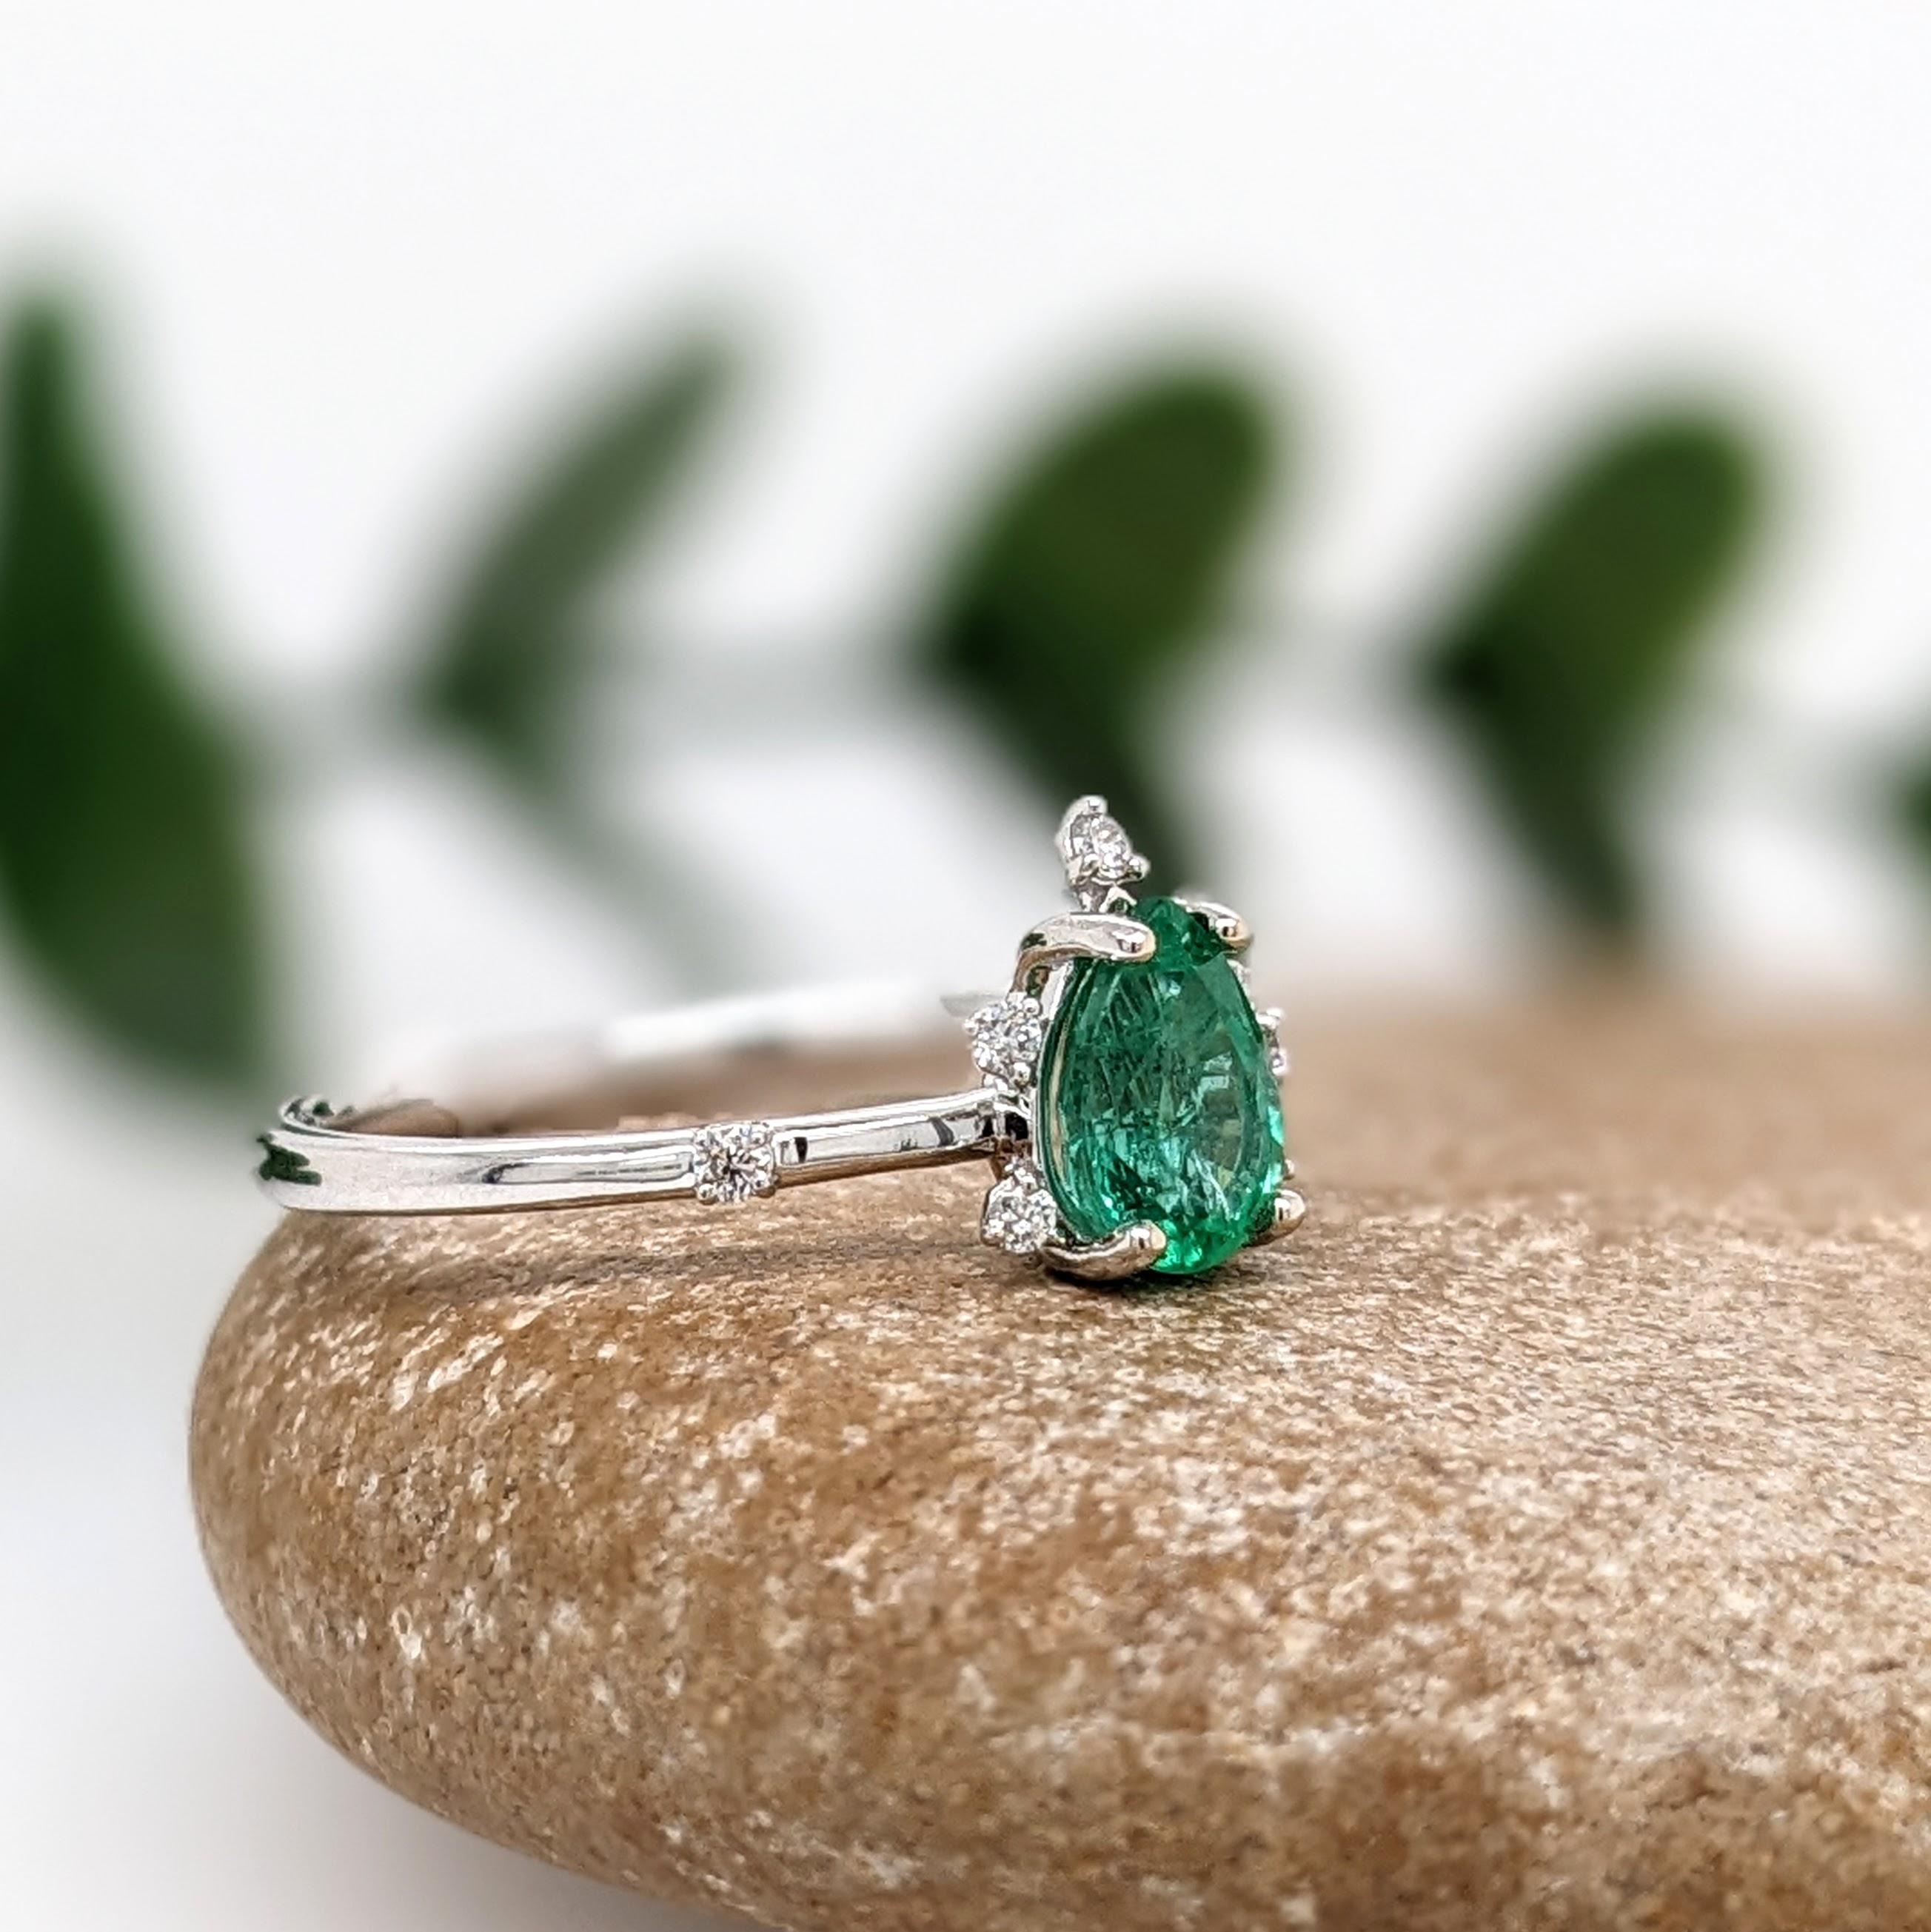 Pear Cut Emerald Ring w Natural Diamond Accents in 14K White Gold Pear Shape 7x5mm